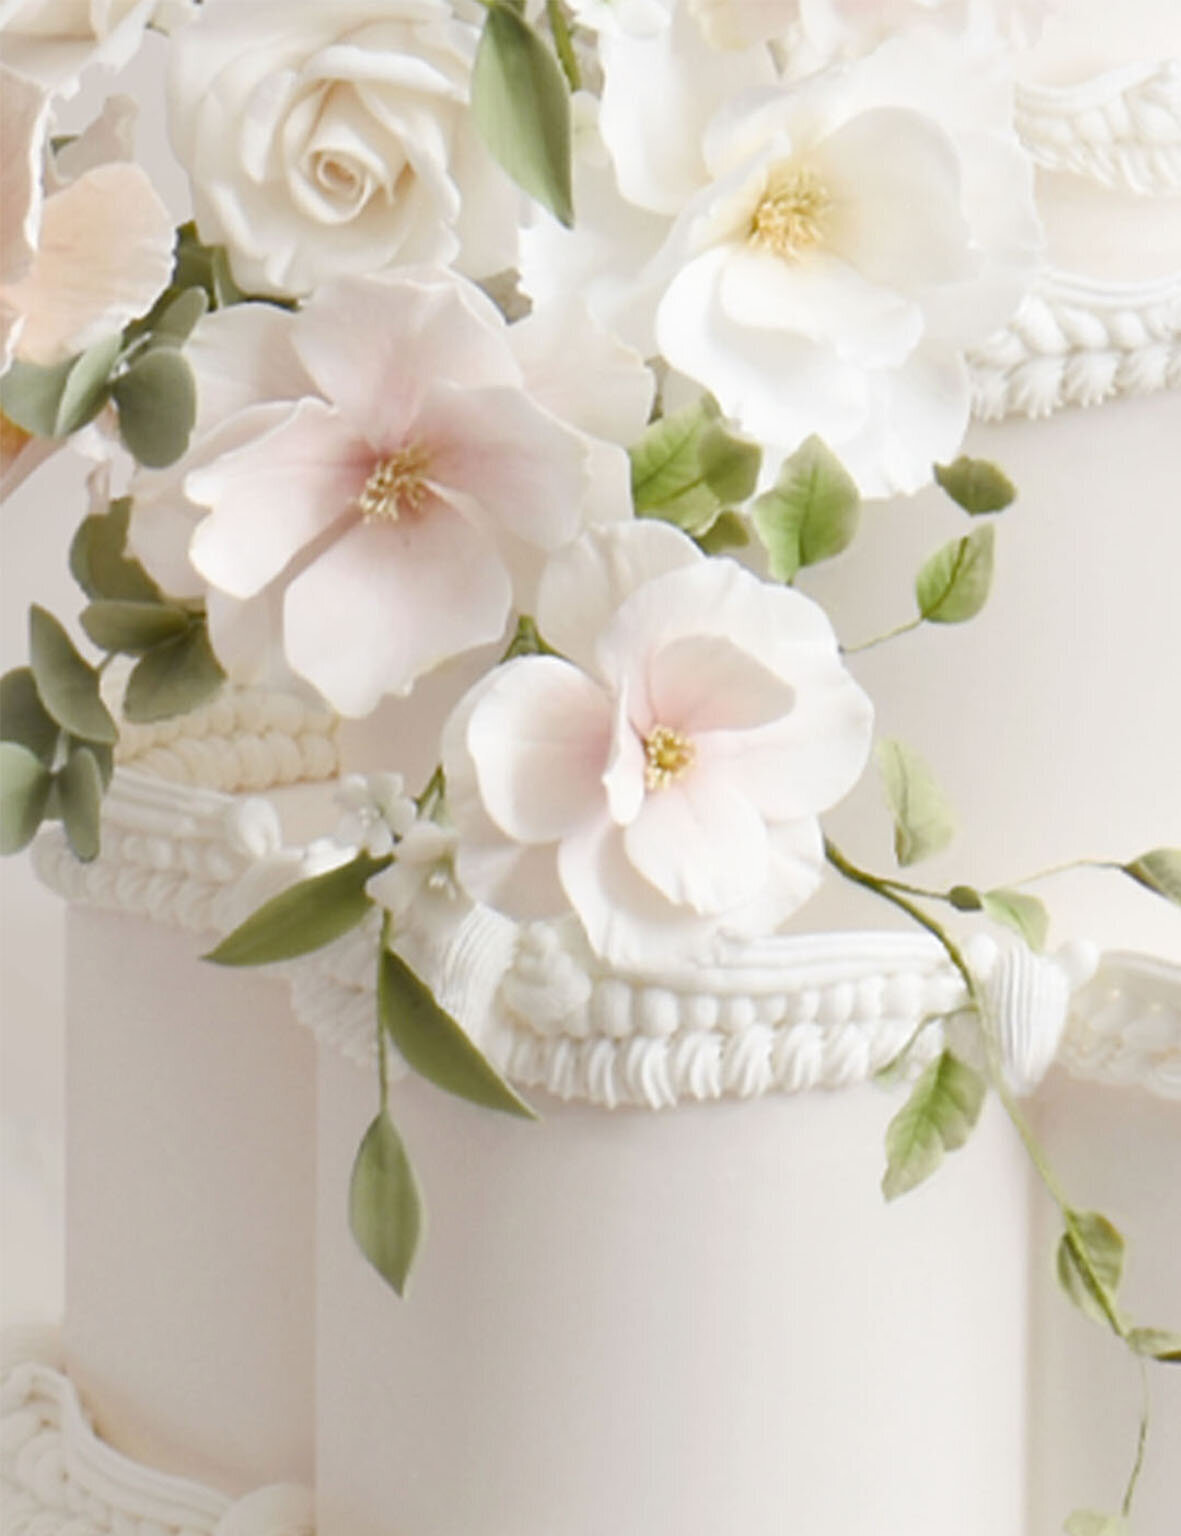 Closeup of a grand white wedding cake with white and pale pink sugar flowers